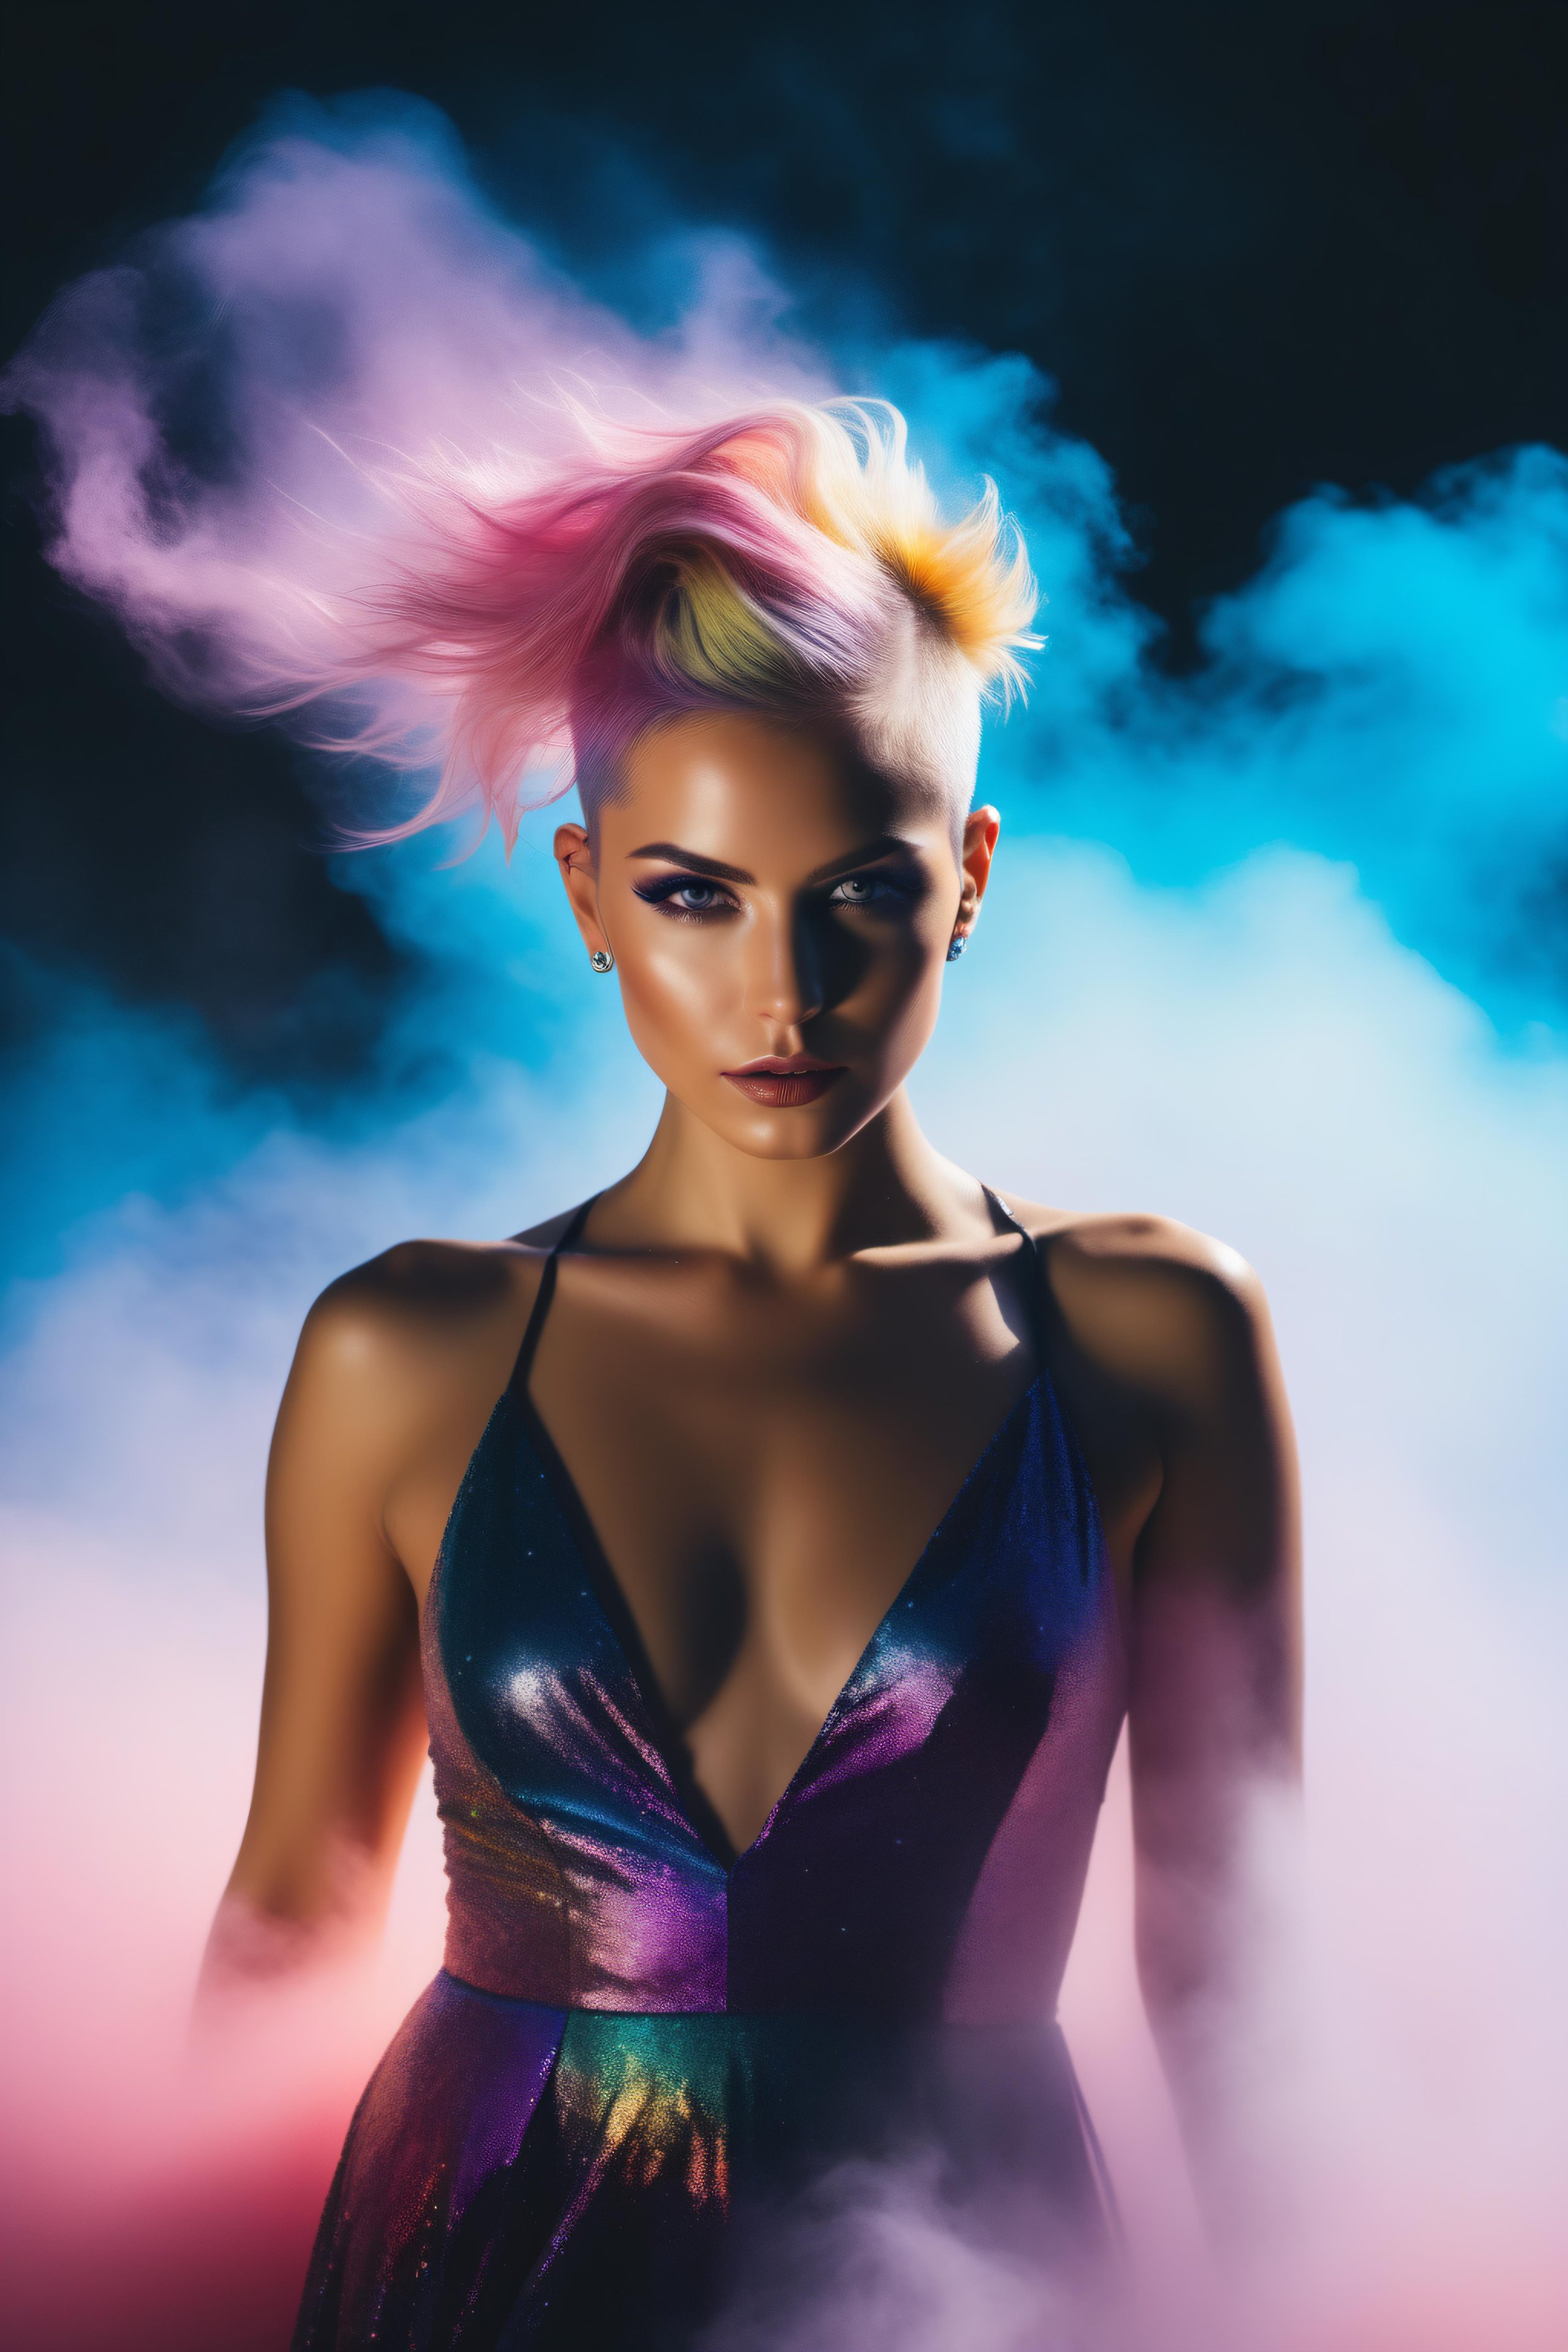 (nsfw:1.2), caucasian girl with short blonde undercut hair with pink strains dissolving into colorful fog, dancing sensually, fantasy style, wearing a glitter rainbow dress, her body is fading into colorful fog, jewlery, nose piercing, necklace, screen full of fog, open eyes, outside, sunset, nature background, studio lighting, evening, wet skin, glossy make-up, glossy skin, looking at viewer, age:20, sunlight from the back flows through the fog, god rays, petite, flat chest, photorealistic, Fujifilm XT3, foggy, evening, light bloom, Tristan Eaton, victo ngai, artgerm, RHADS, ross draws, masterpiece, best quality, photograph, dreamlike, face focus, intricate details, sharp focus, photography, photorealism, photorealistic, soft focus, volumetric light, (intricate details), (hyperdetailed), high detailed, lot of details, high quality, soft cinematic light, dramatic atmosphere, atmospheric perspective, raytracing, subsurface scattering, (highly detailed skin:1.3), (skin details:1.3), (RAW photo:1.2), (photorealistic:1.4), (masterpiece:1.4), (best quality:1.4), (detailed facial features), (best illustration), (beautifully detailed eyes), (super detailed), (wallpaper), (detailed face), more colorful fog, foggy, colorful fog infront of subject